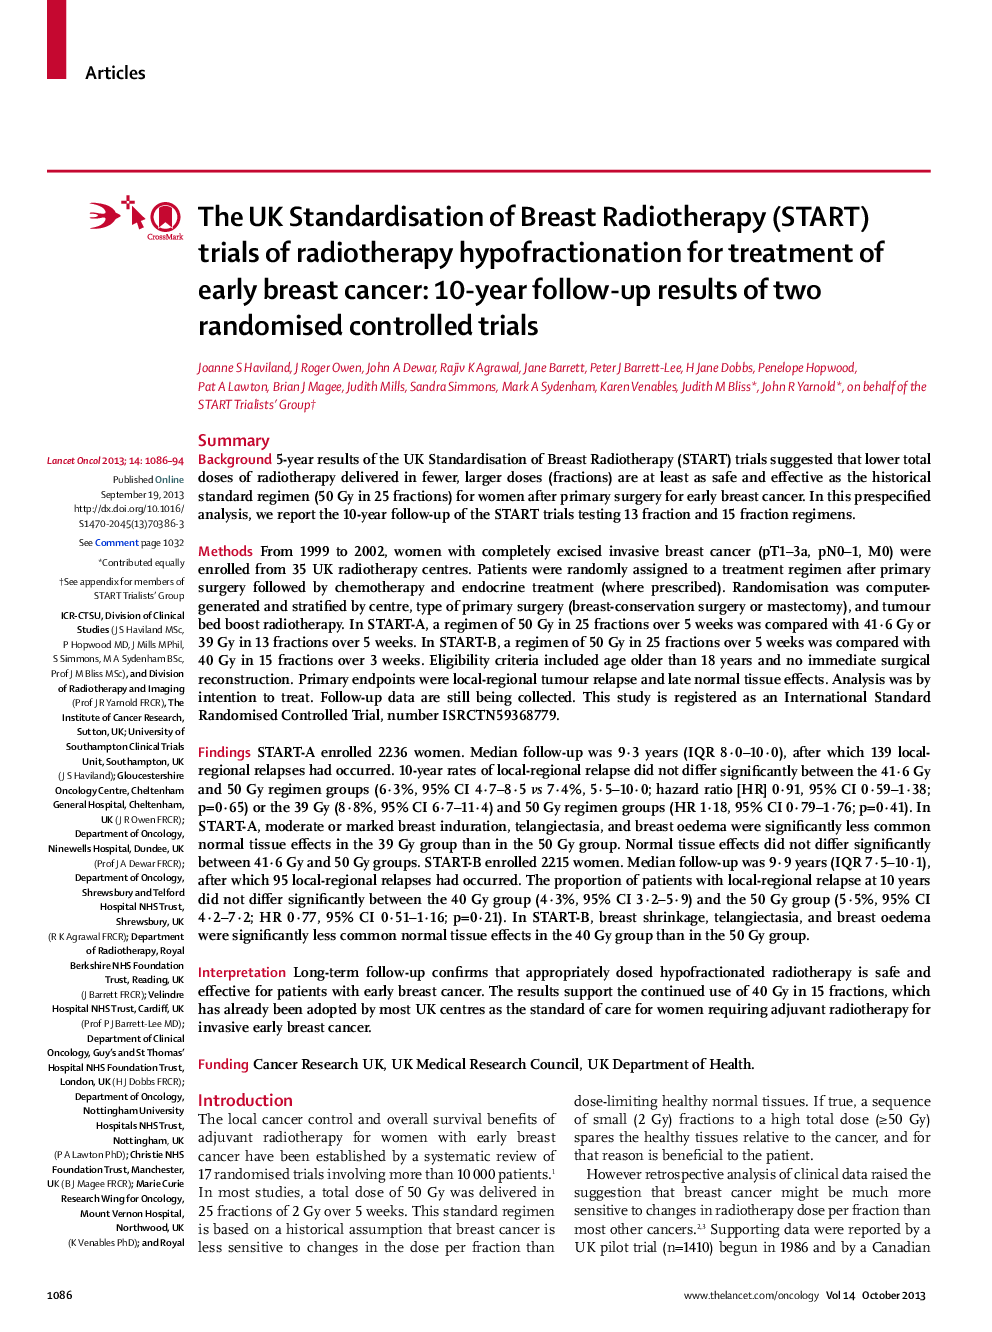 The UK Standardisation of Breast Radiotherapy (START) trials of radiotherapy hypofractionation for treatment of early breast cancer: 10-year follow-up results of two randomised controlled trials